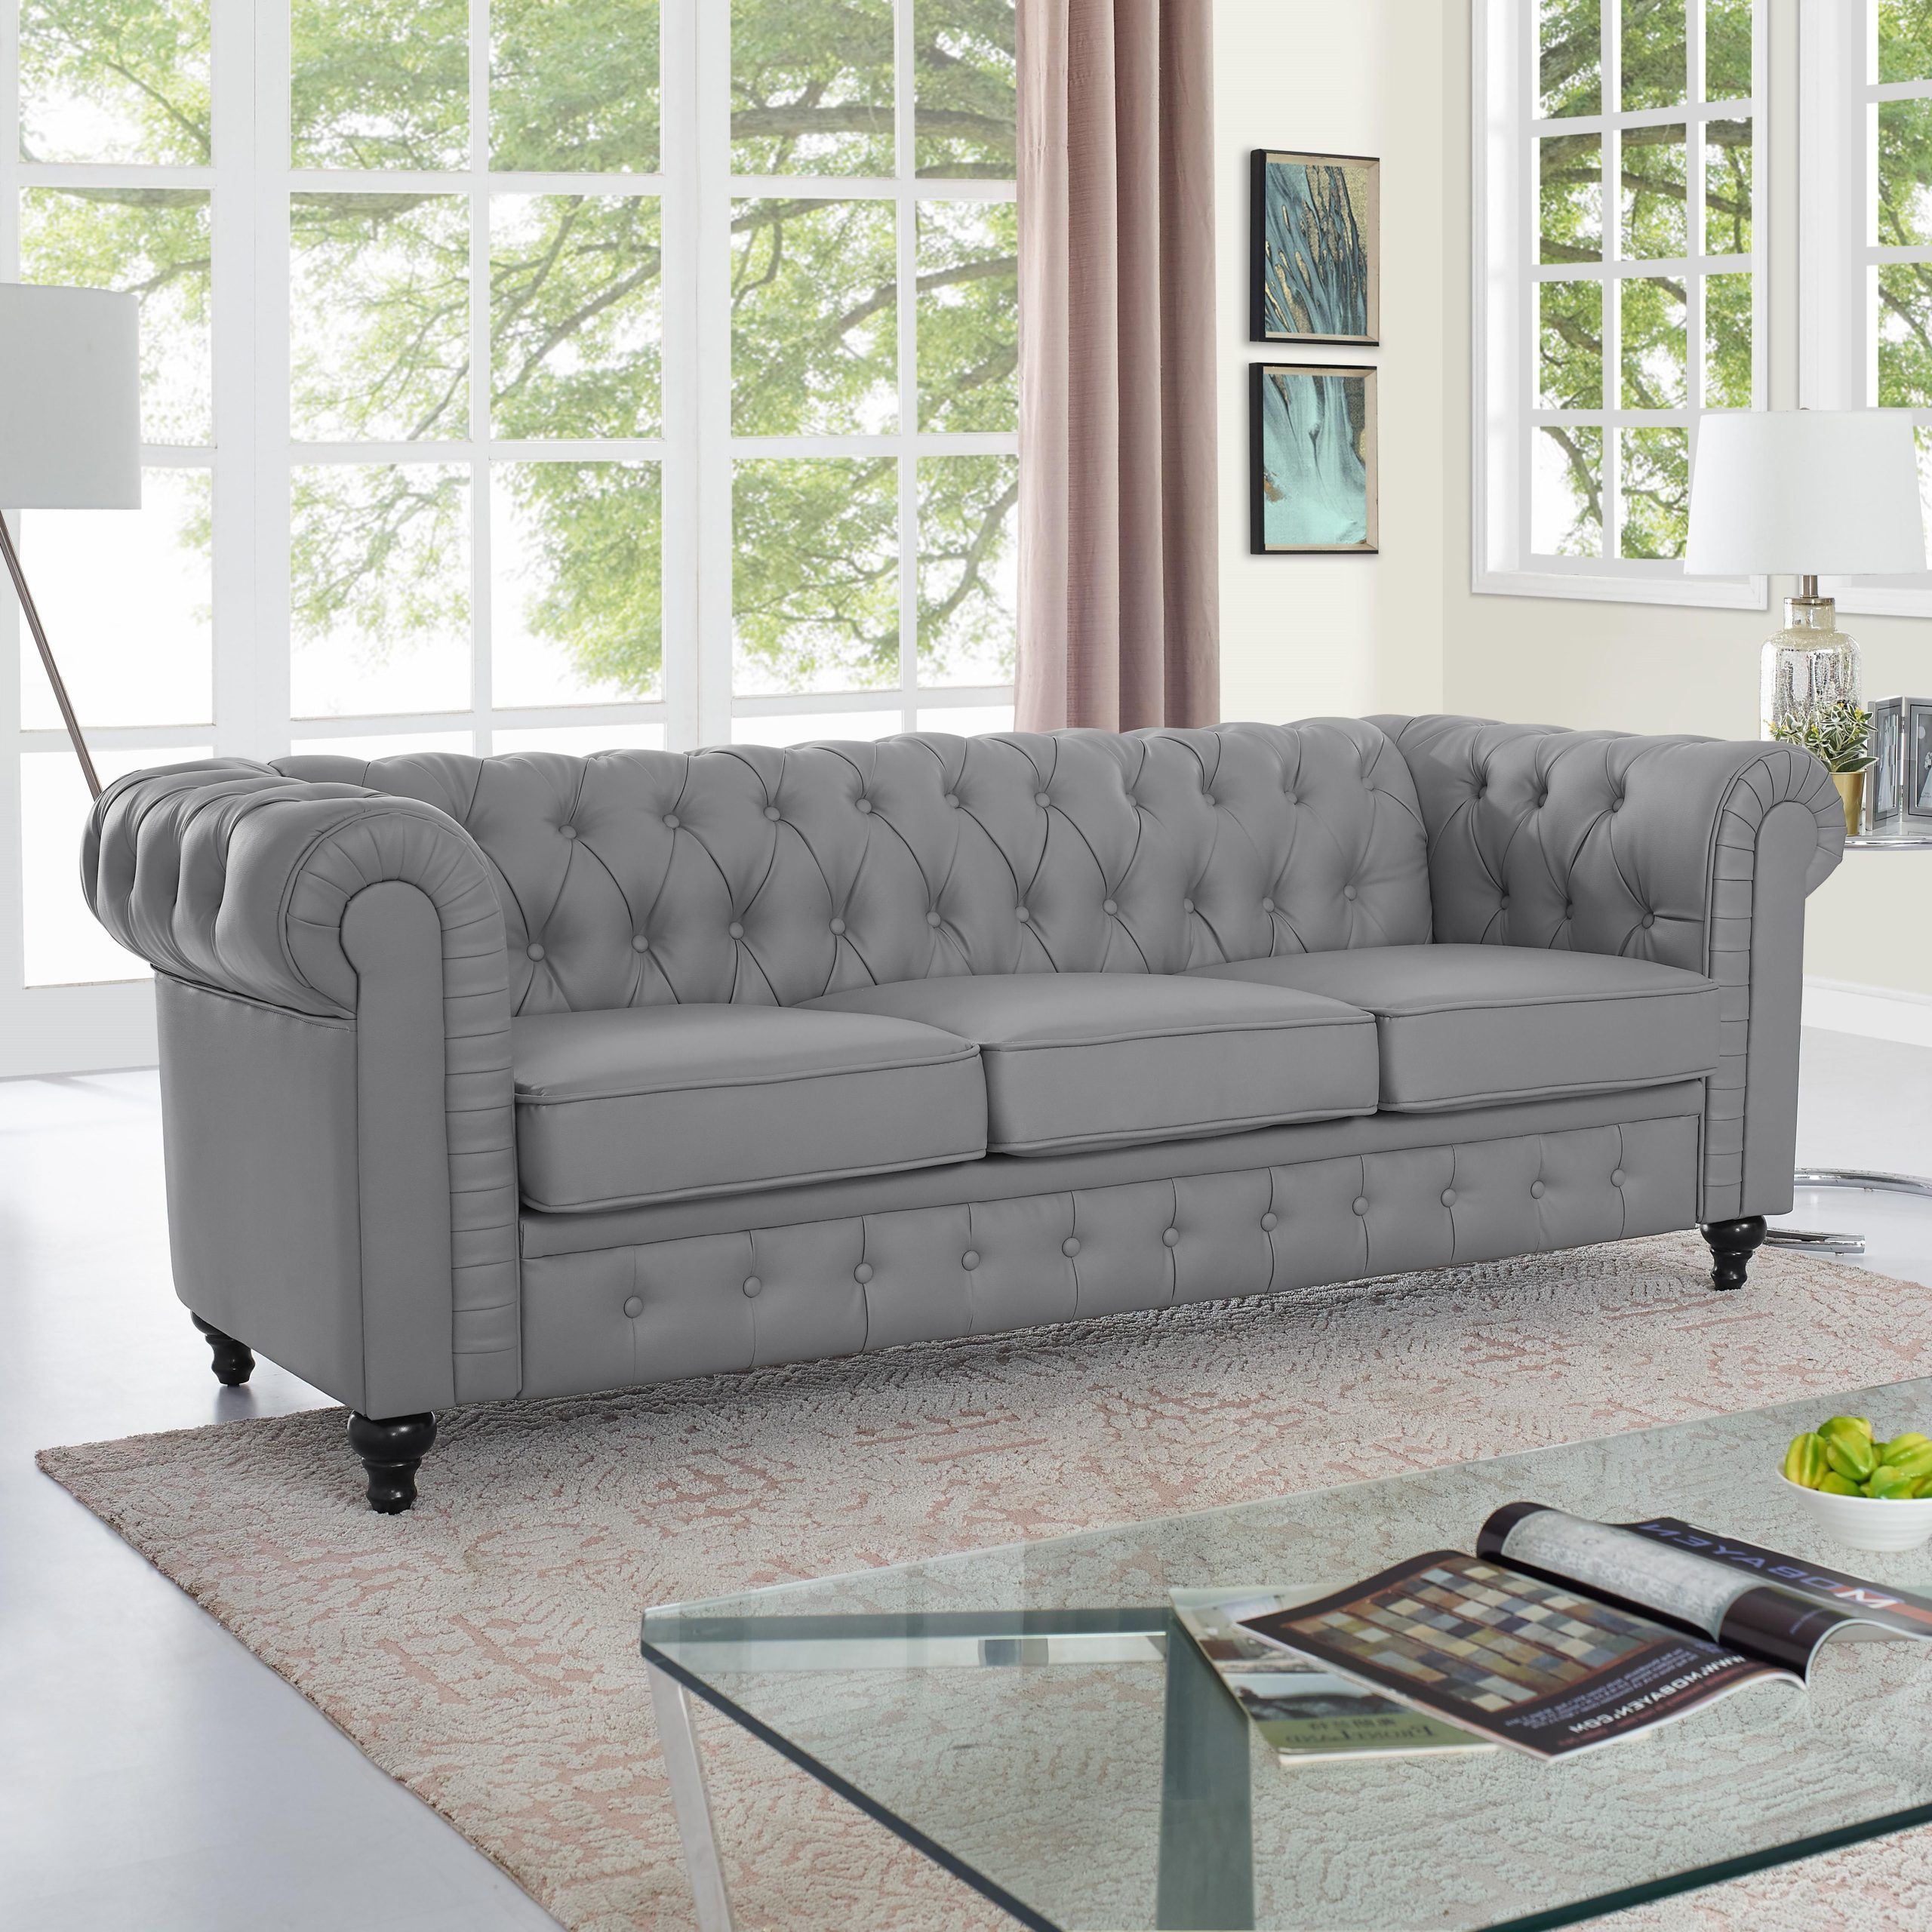 Emery Chesterfield Sofa With Rolled Arms, Tufted Cushionsnaomi Home In Chesterfield Sofas (View 7 of 21)